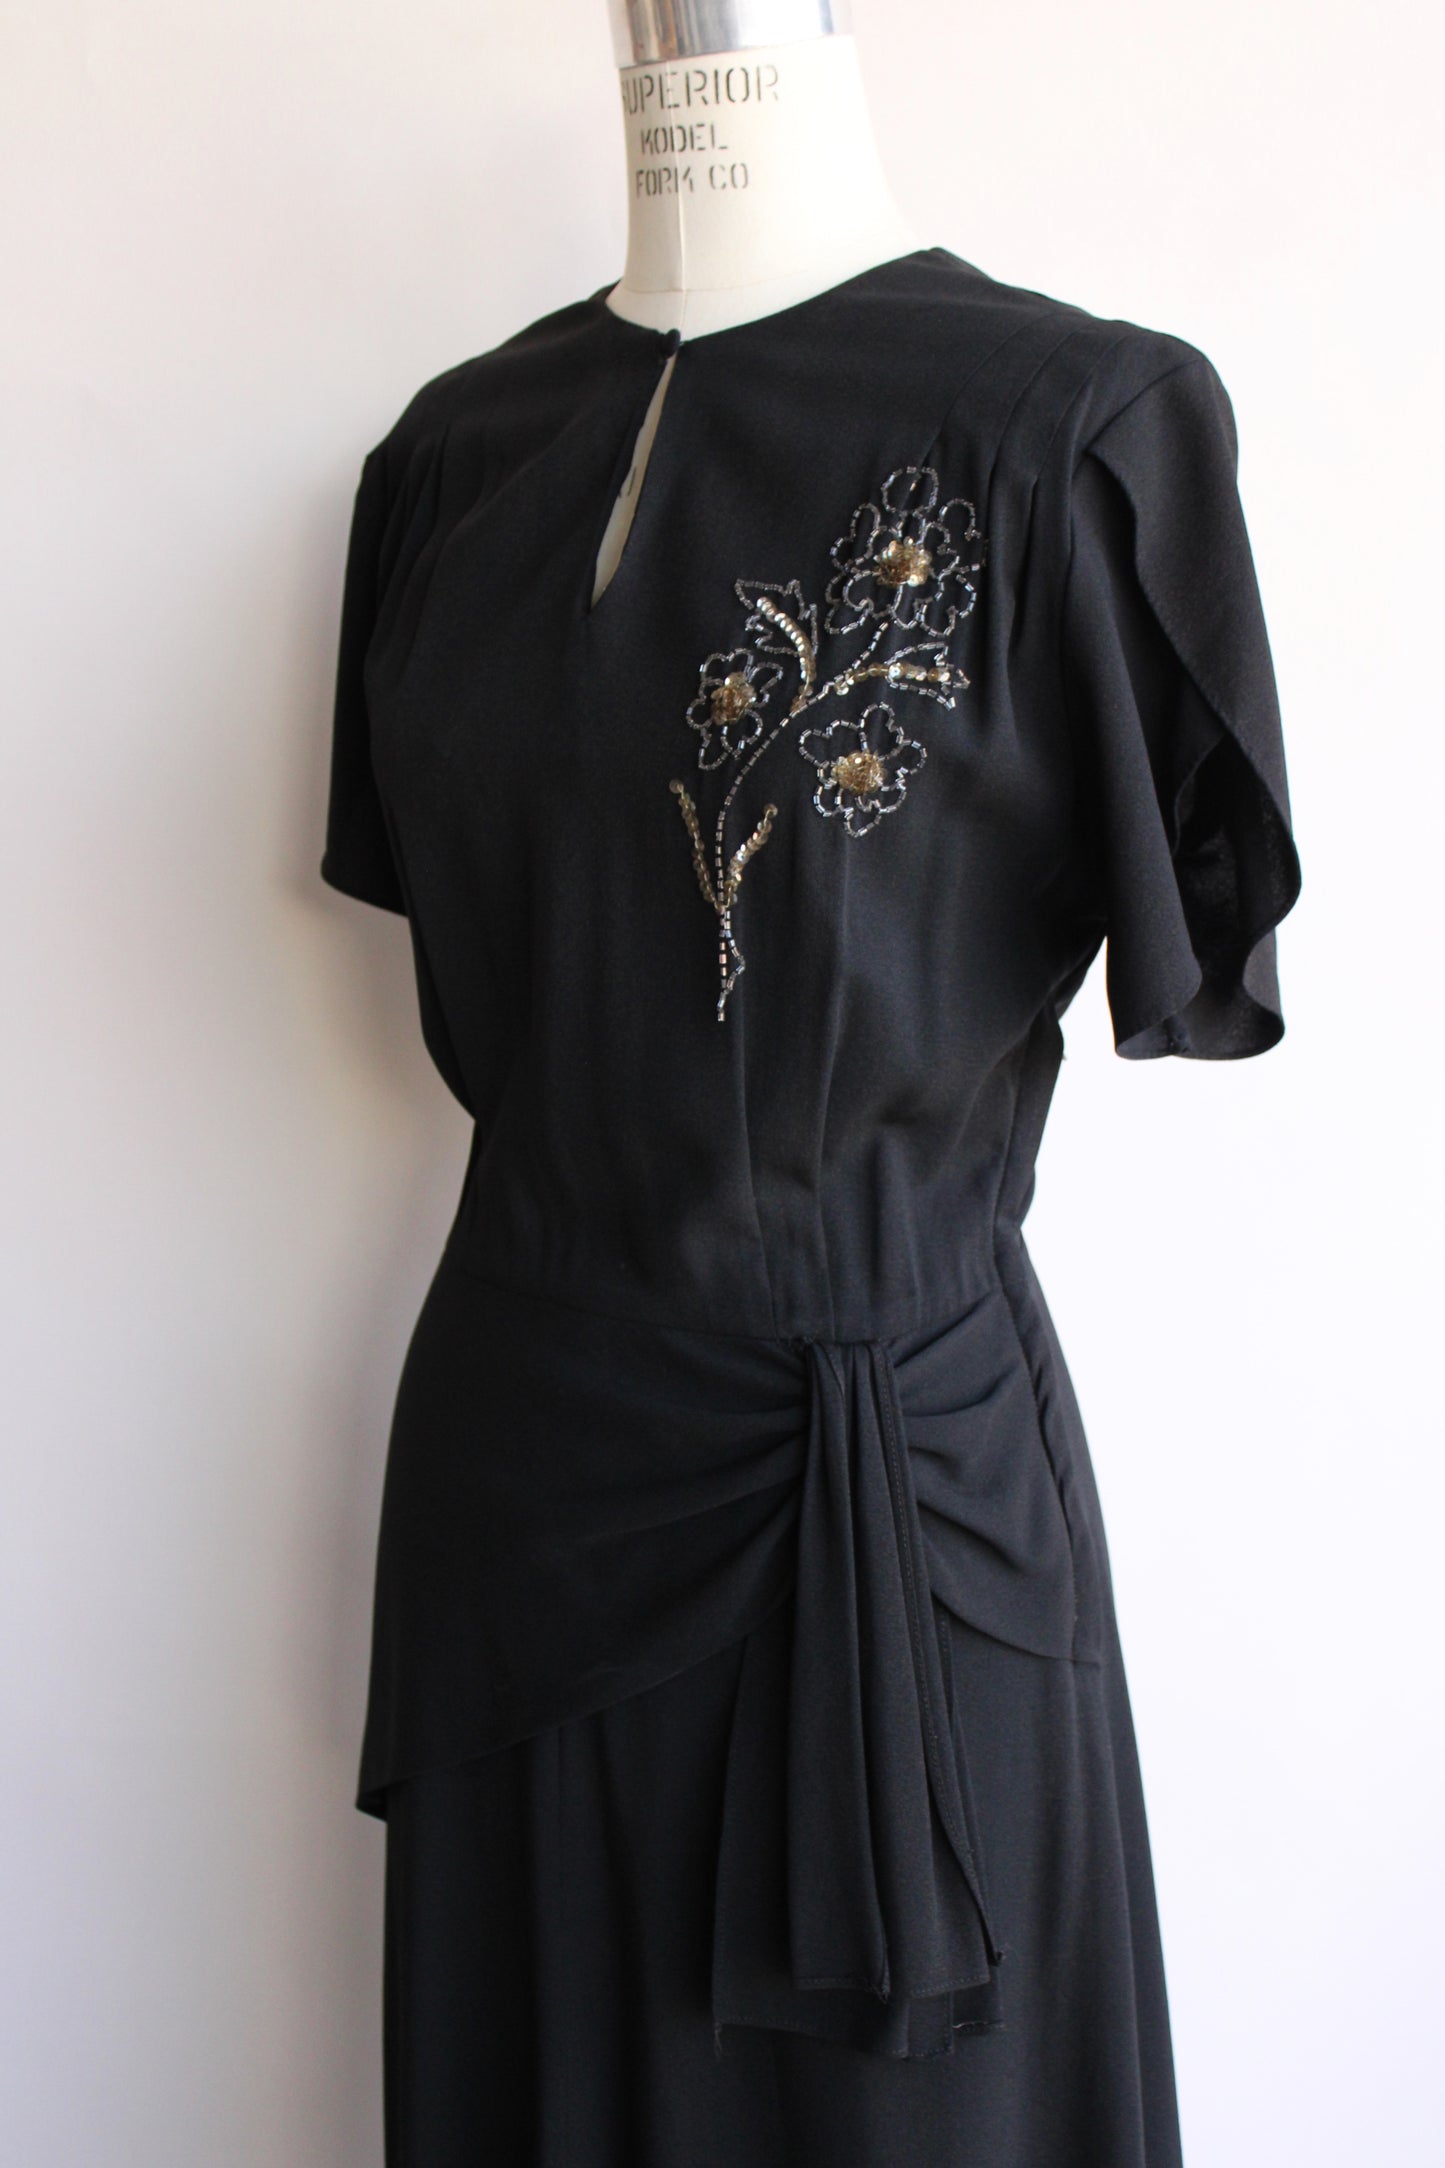 Vintage 1940s Dress with Bead Flower and Peplum